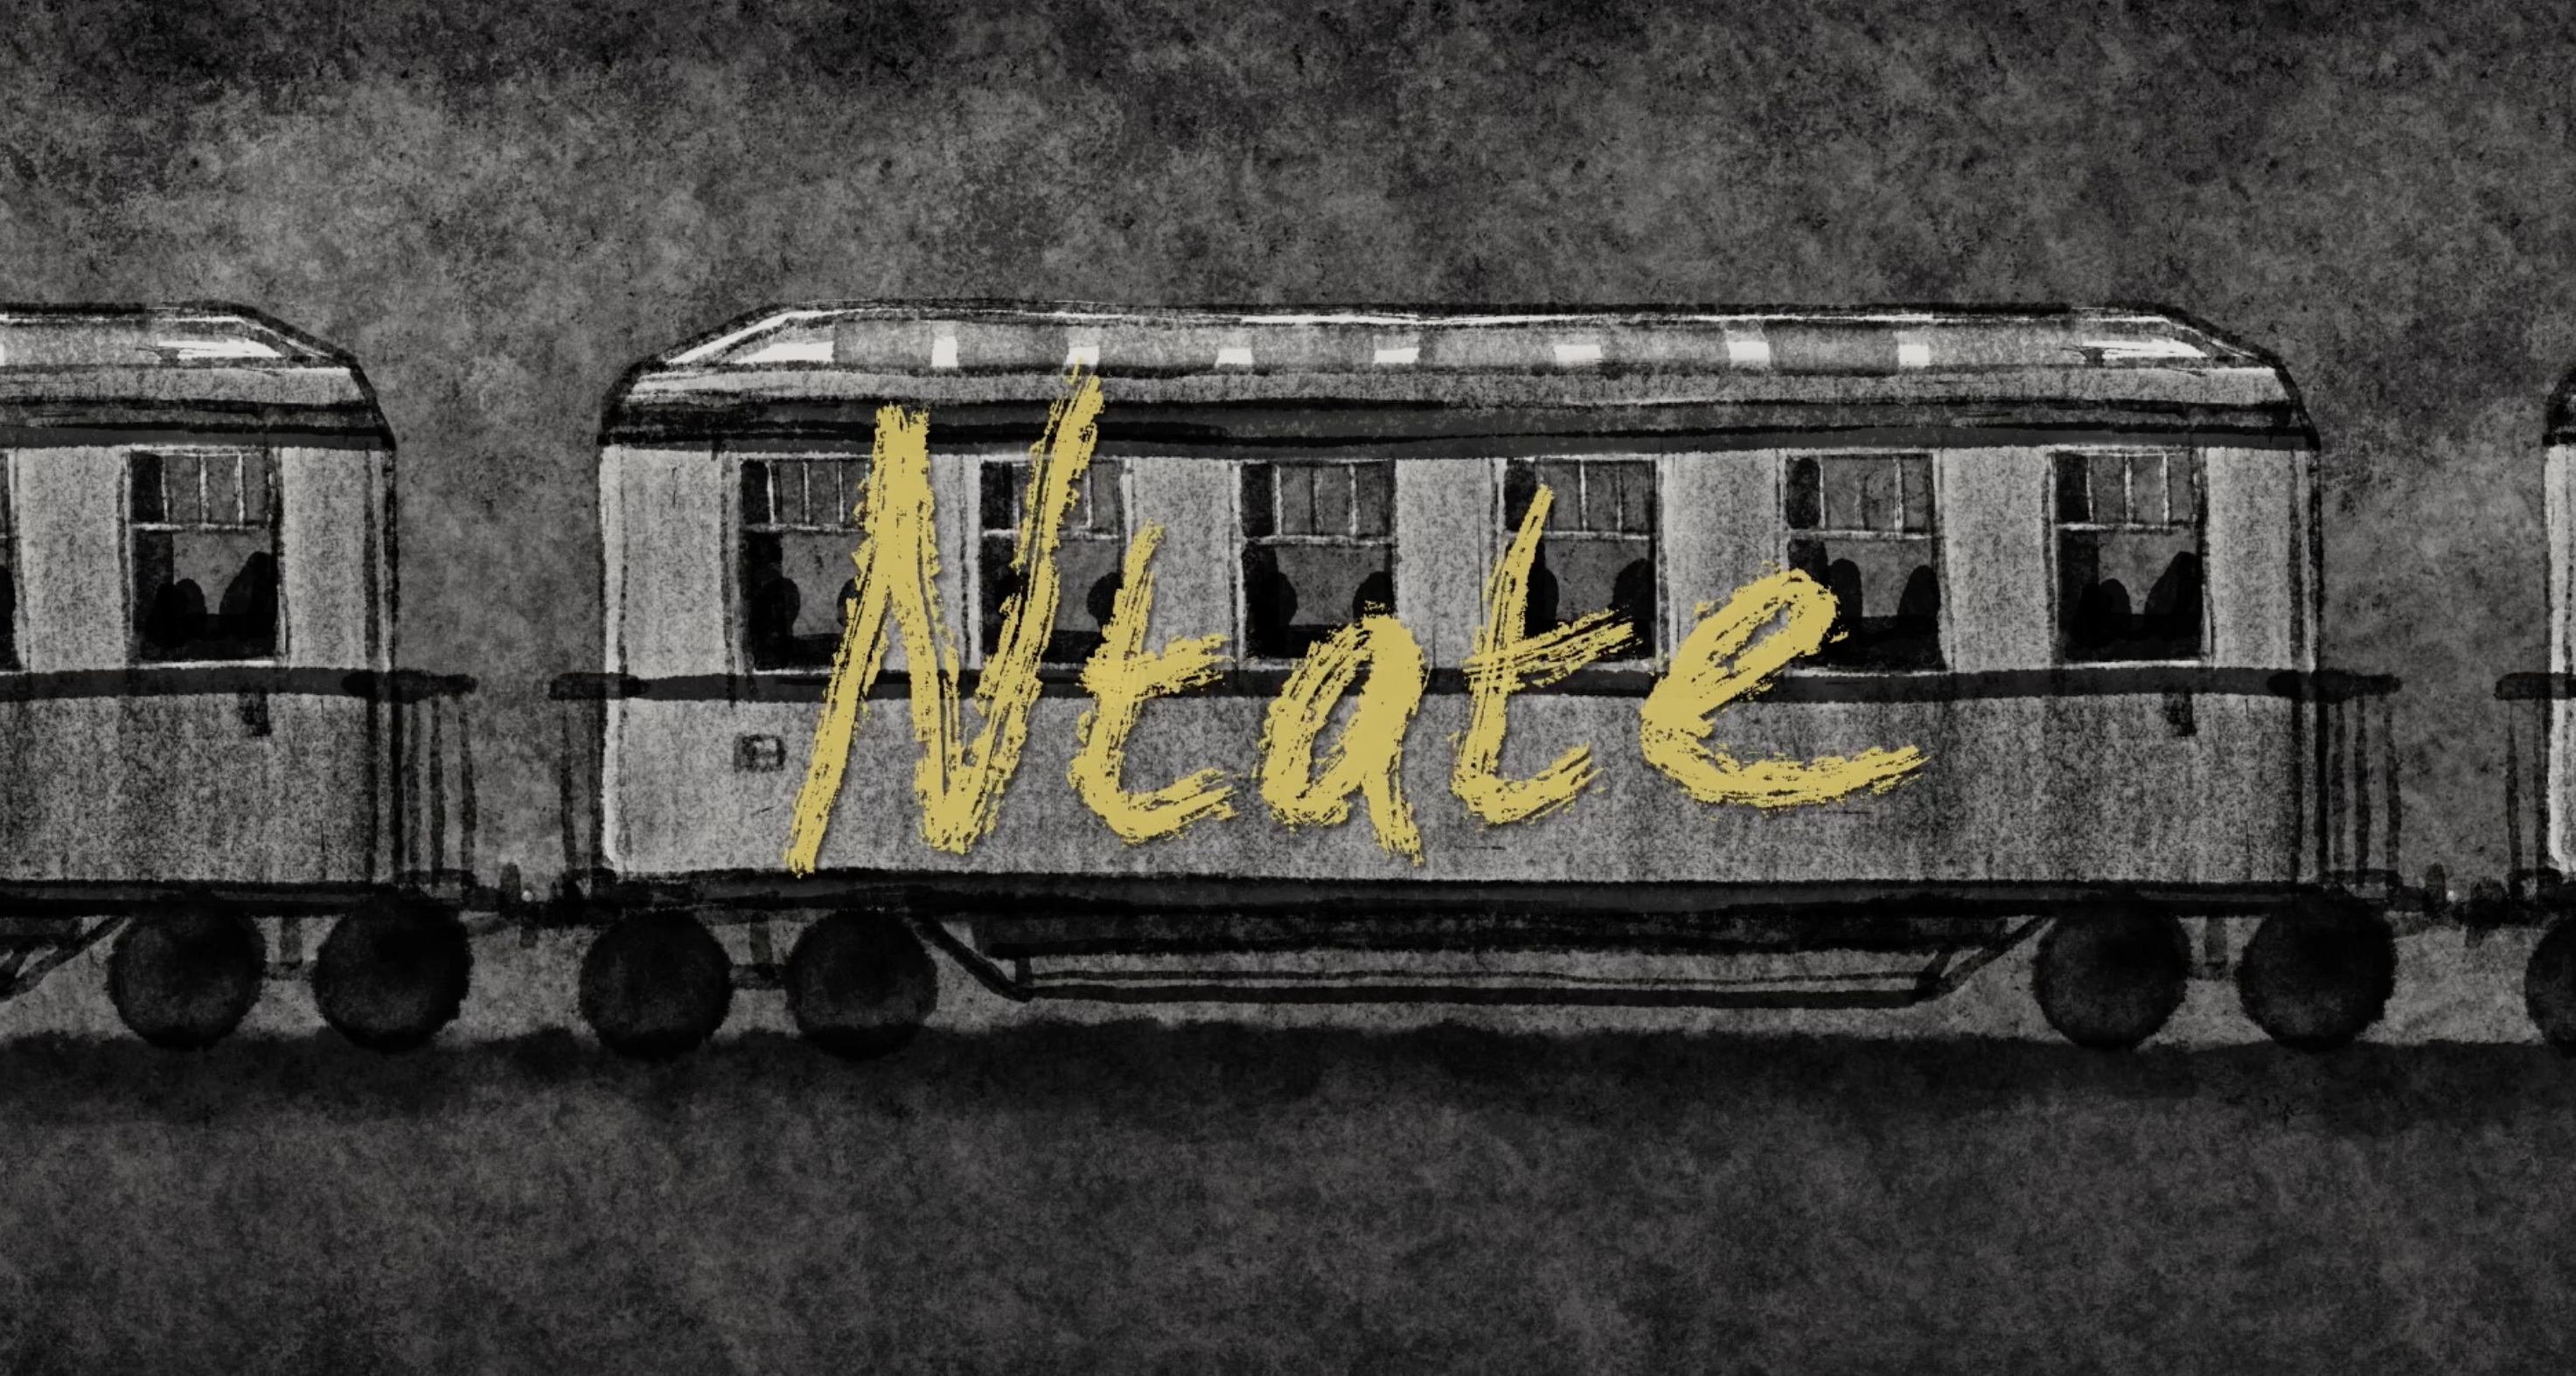 An illustration of a train with the text 'Ntate' over it.